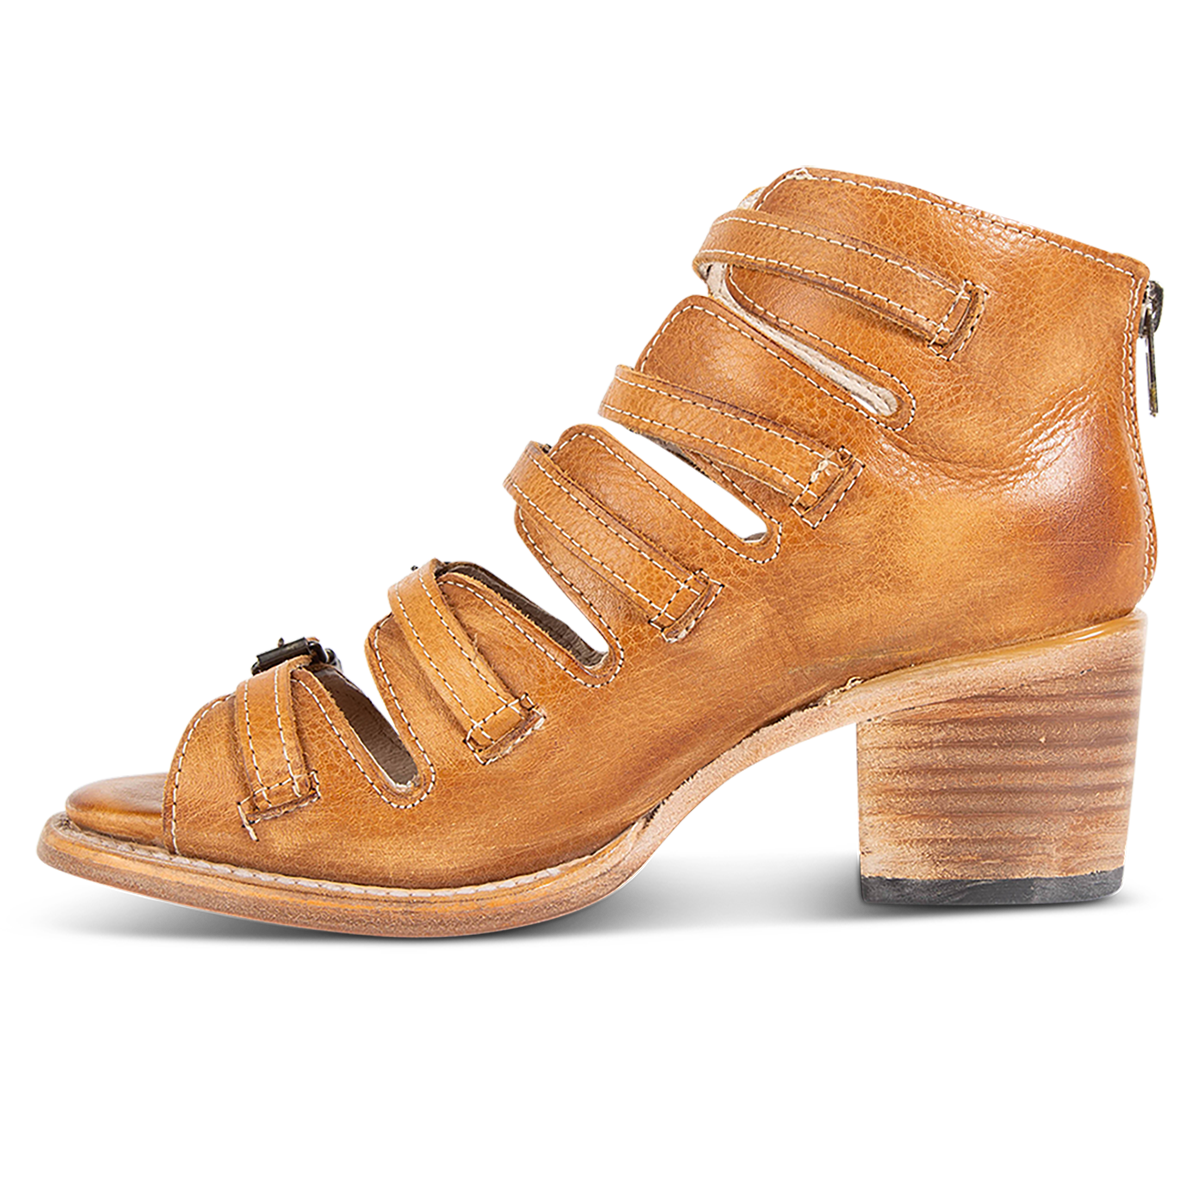 Inside view showing leather straps and stacked heel on FREEBIRD women's Quinn wheat sandal